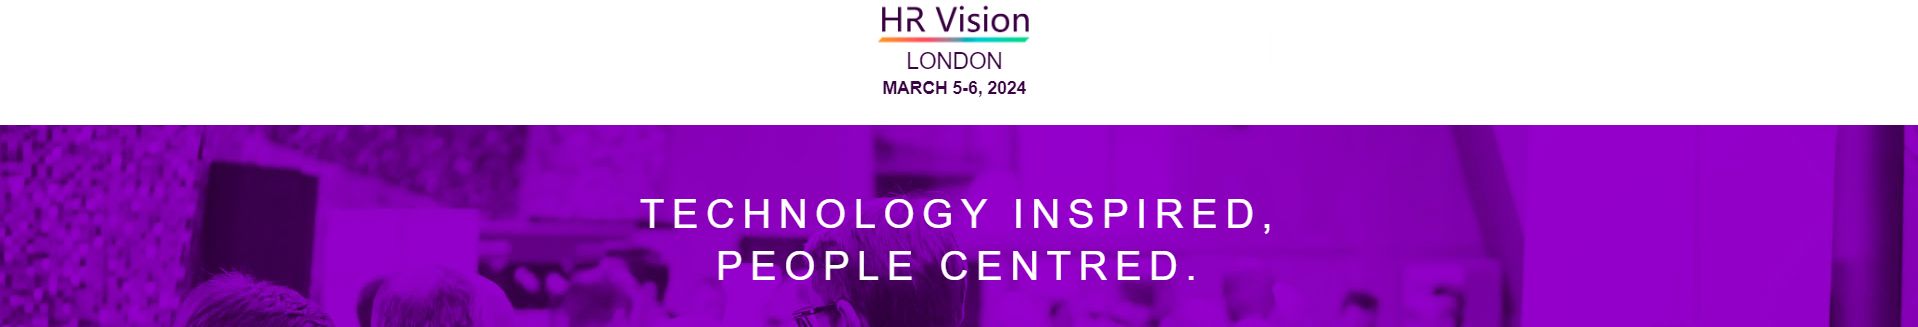 HR-Vision-Event-in-London-–-HR-Leadership-Talent-Stratergy.jpg